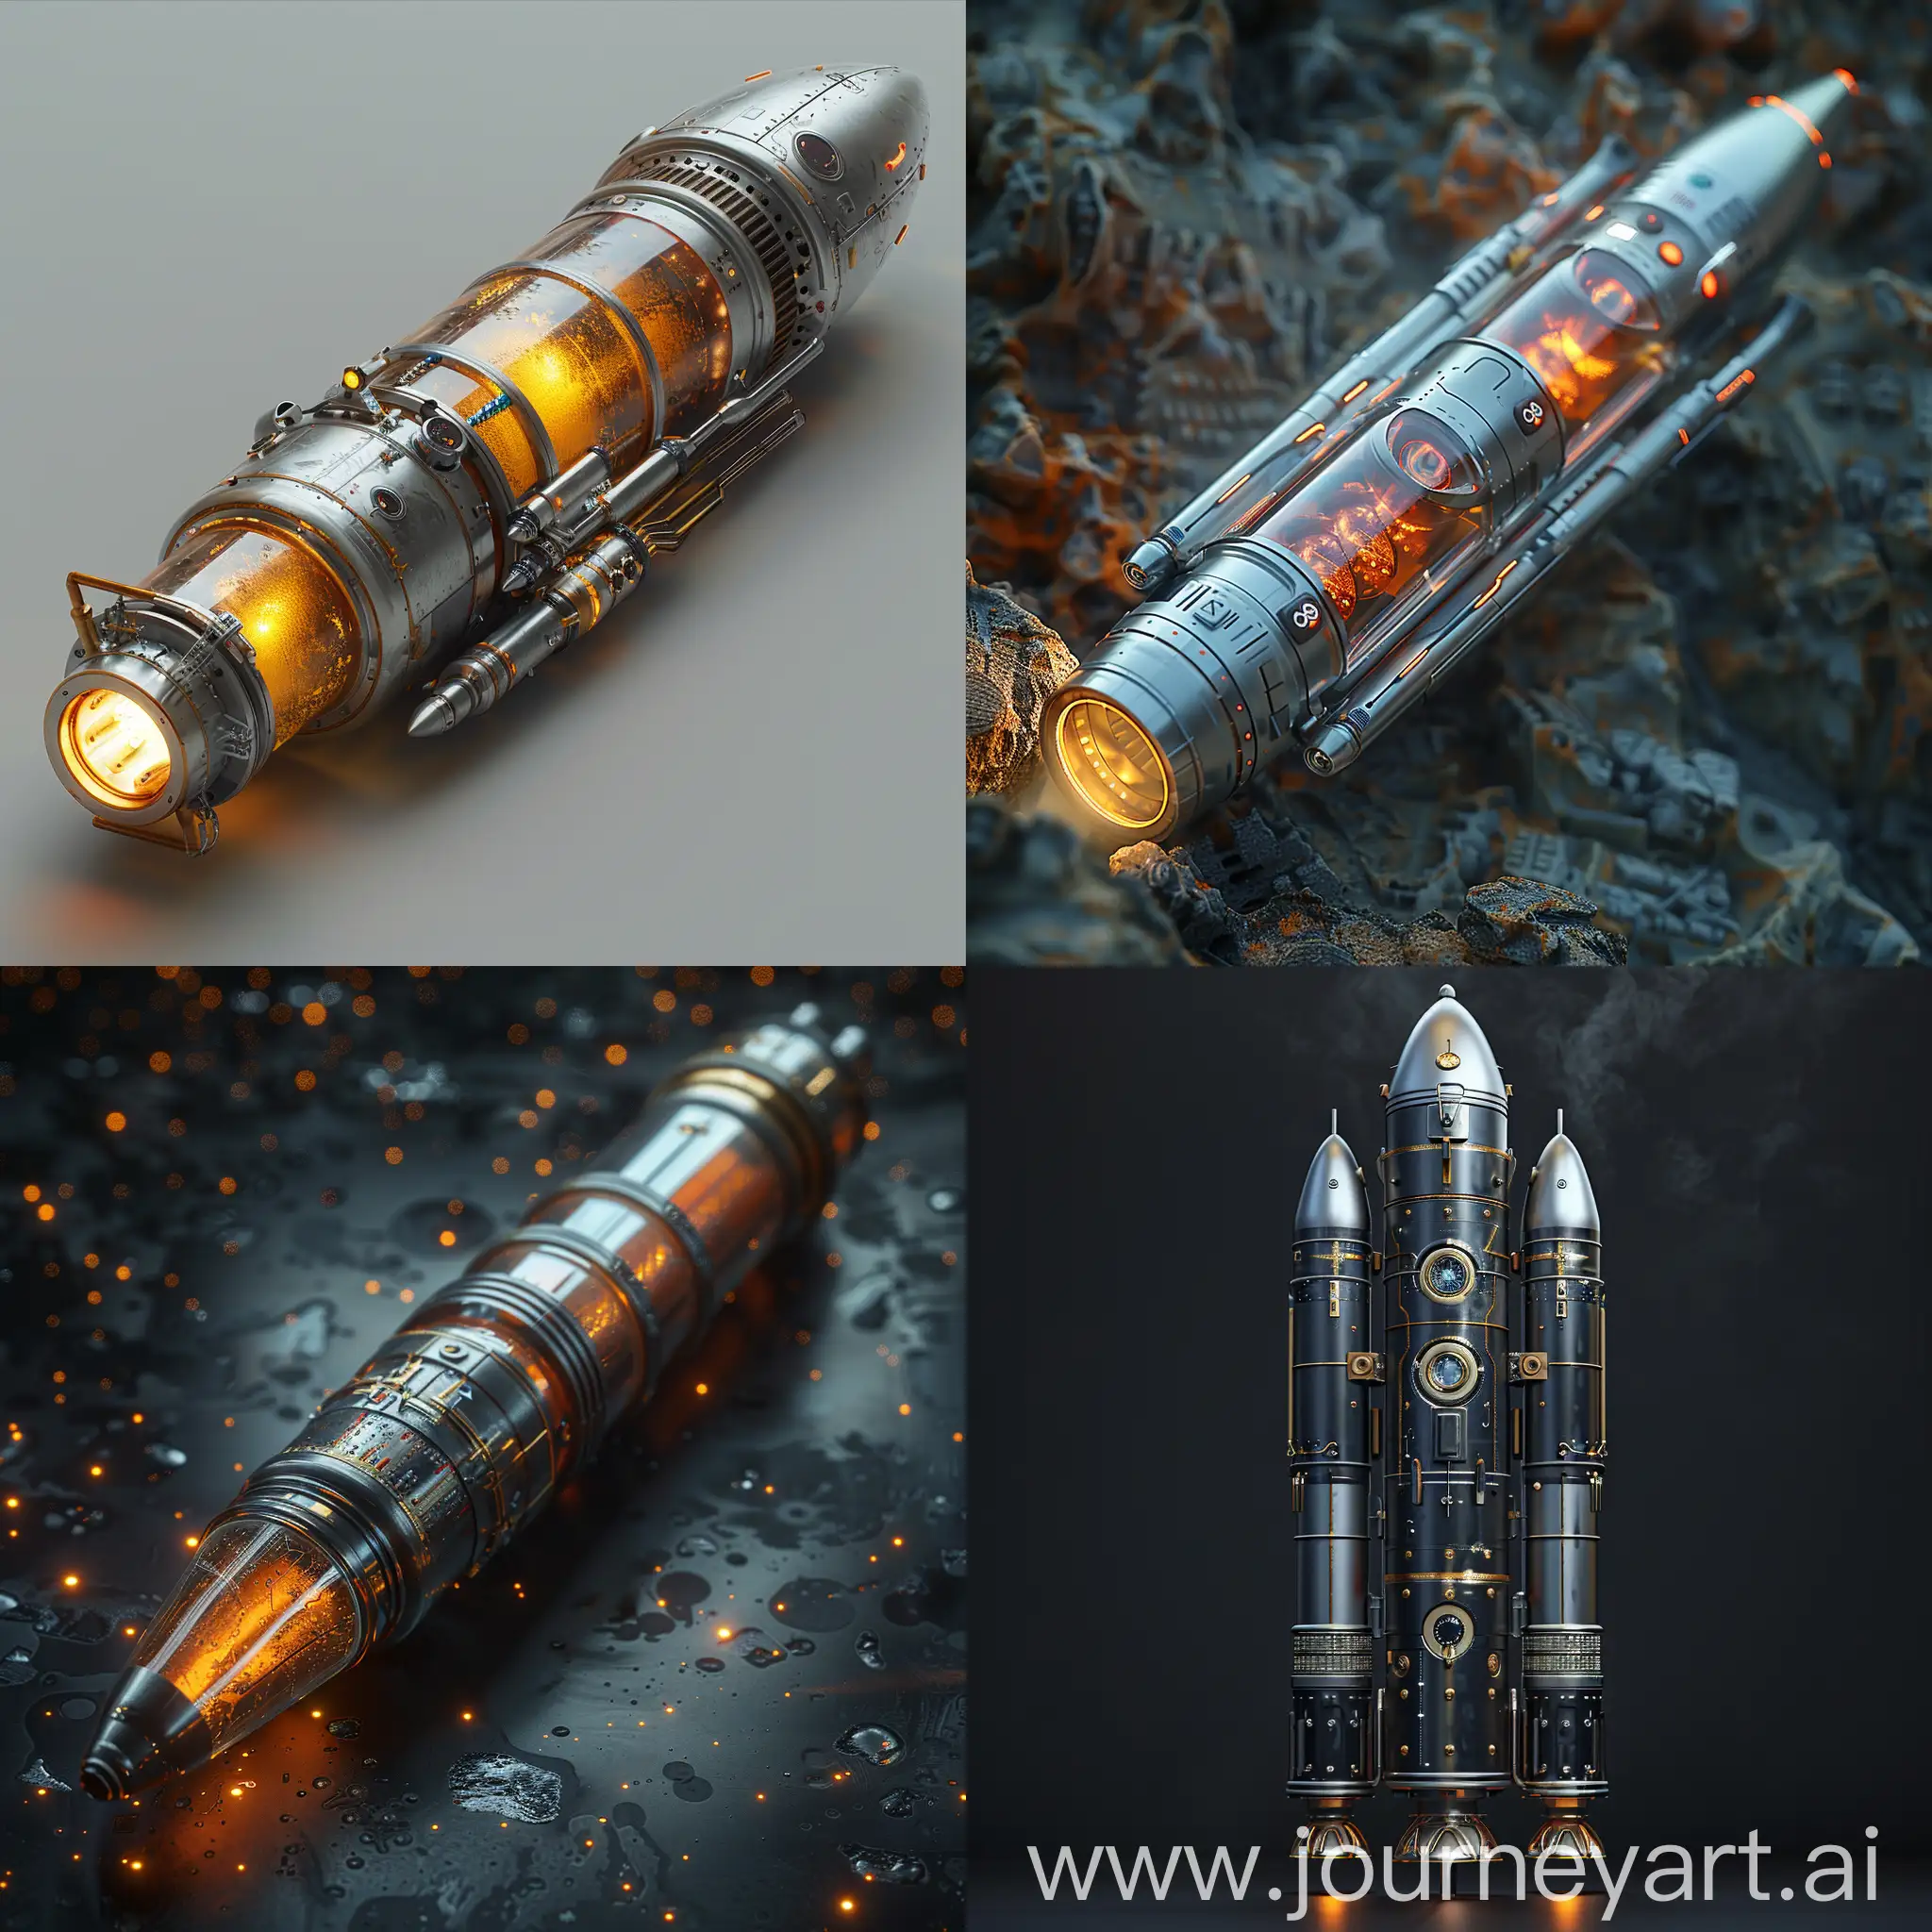 Futuristic-Rocket-Launcher-with-UltraModern-Stainless-Steel-Design